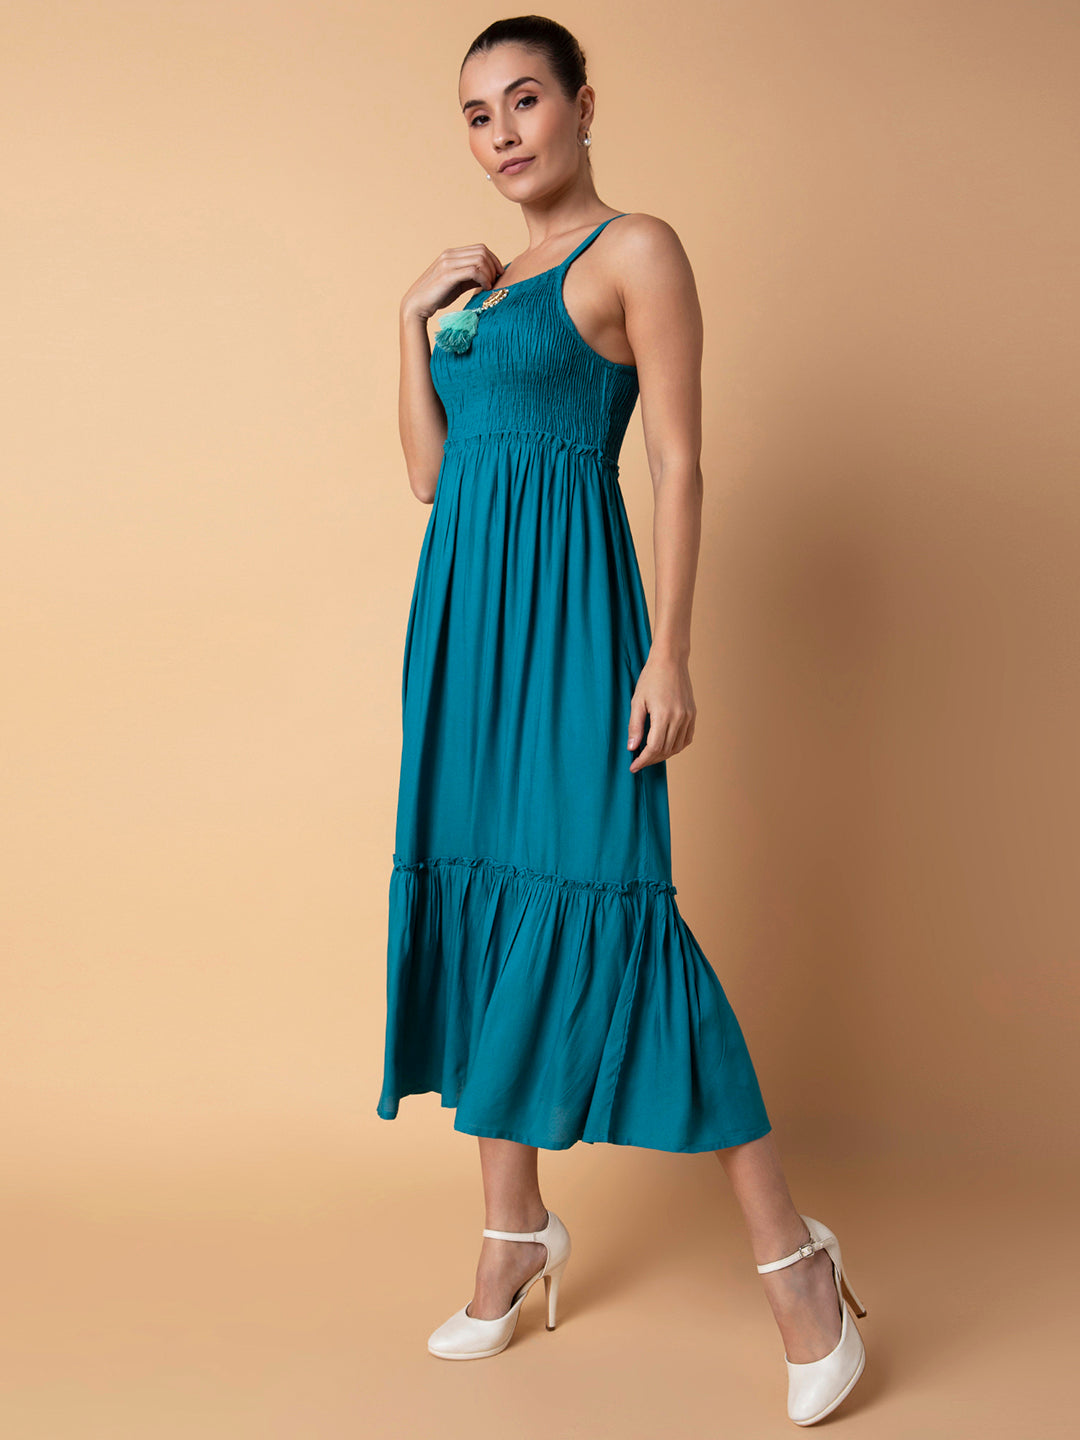 Women Solid Turquoise Blue Midi Fit and Flare Dress with Shrug and Belt